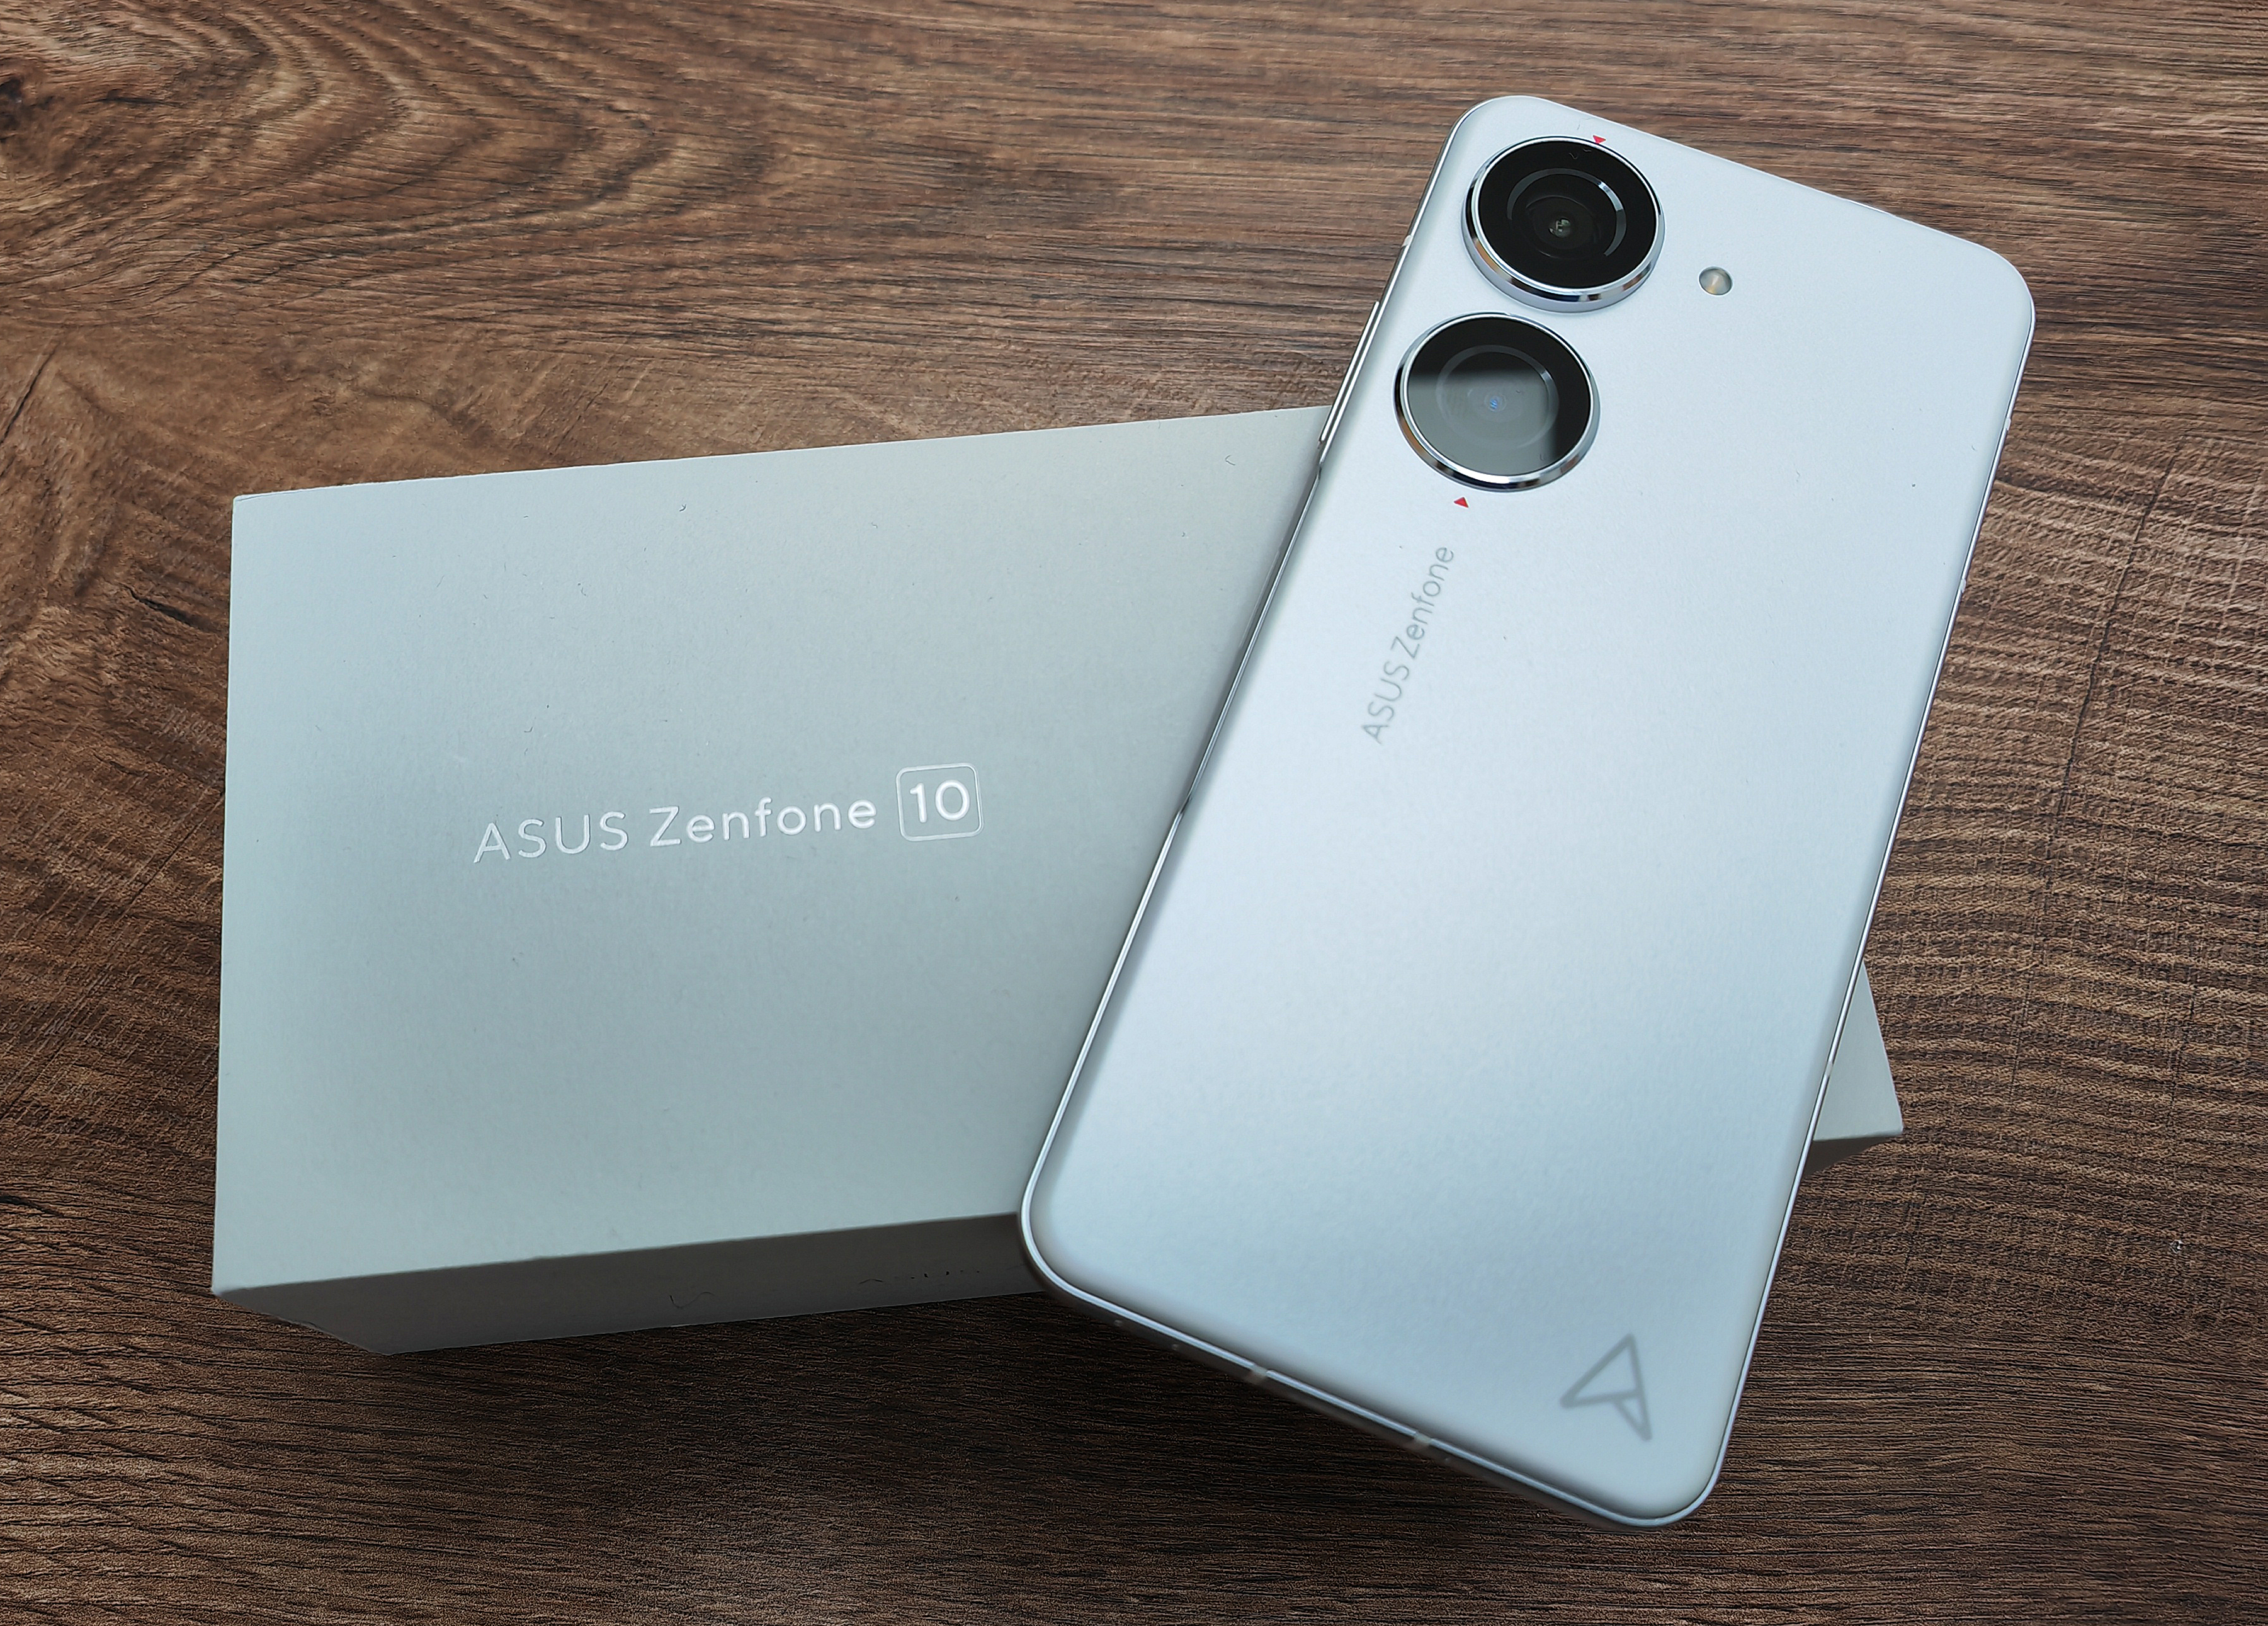 ASUS Zenfone 10: The Smallest and Most Powerful Flagship Smartphone yet